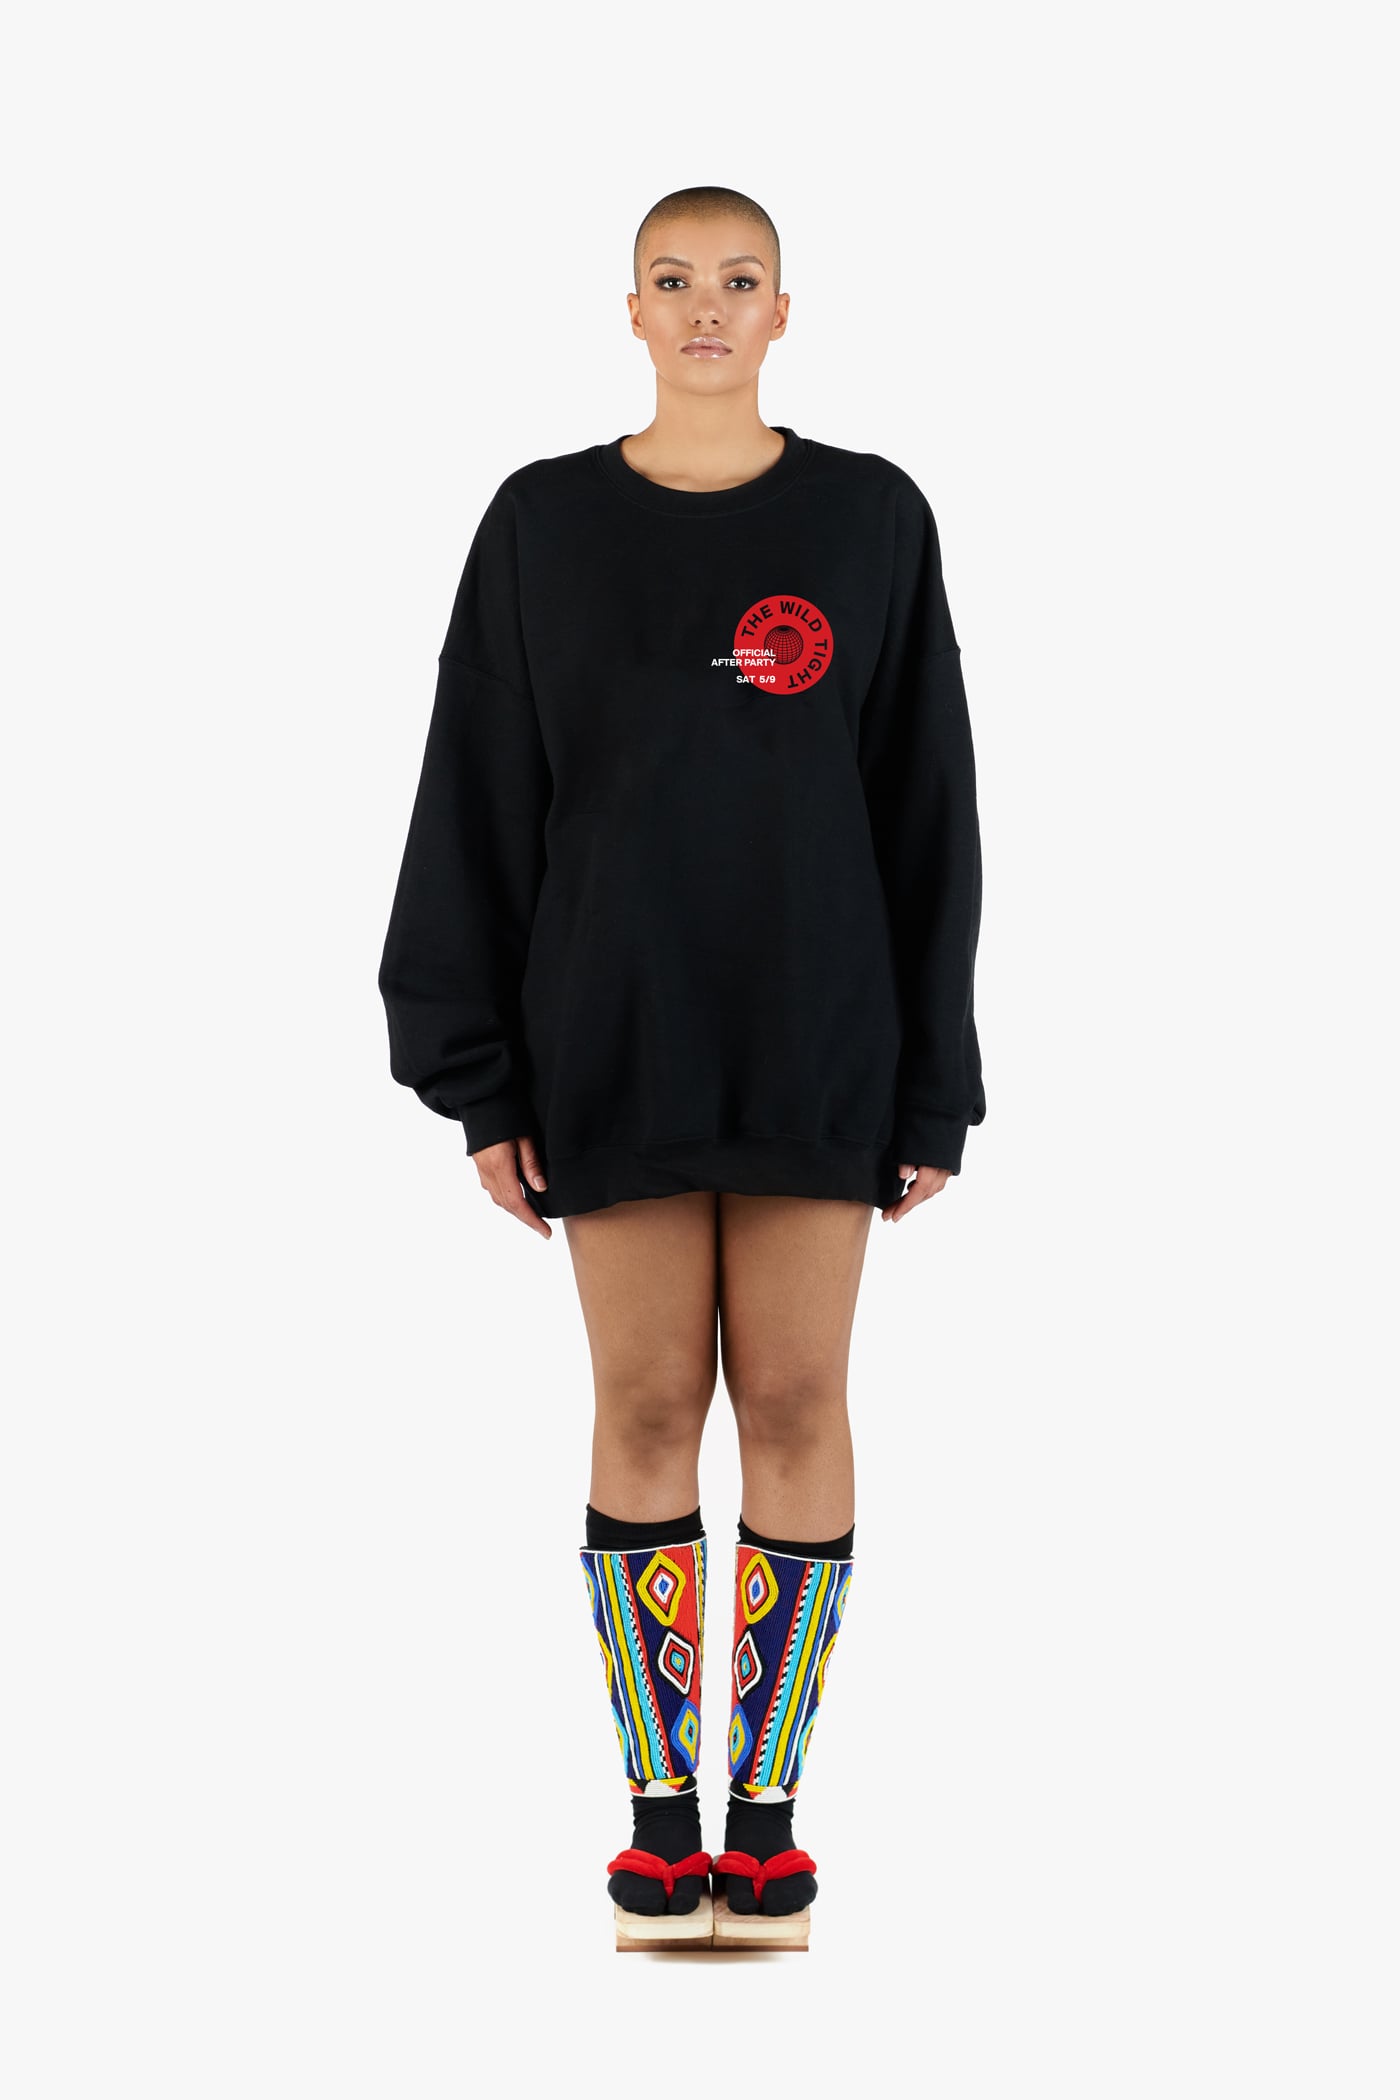 The Wild Tight Official After Party Crewneck - Black & Red – Badu World ...